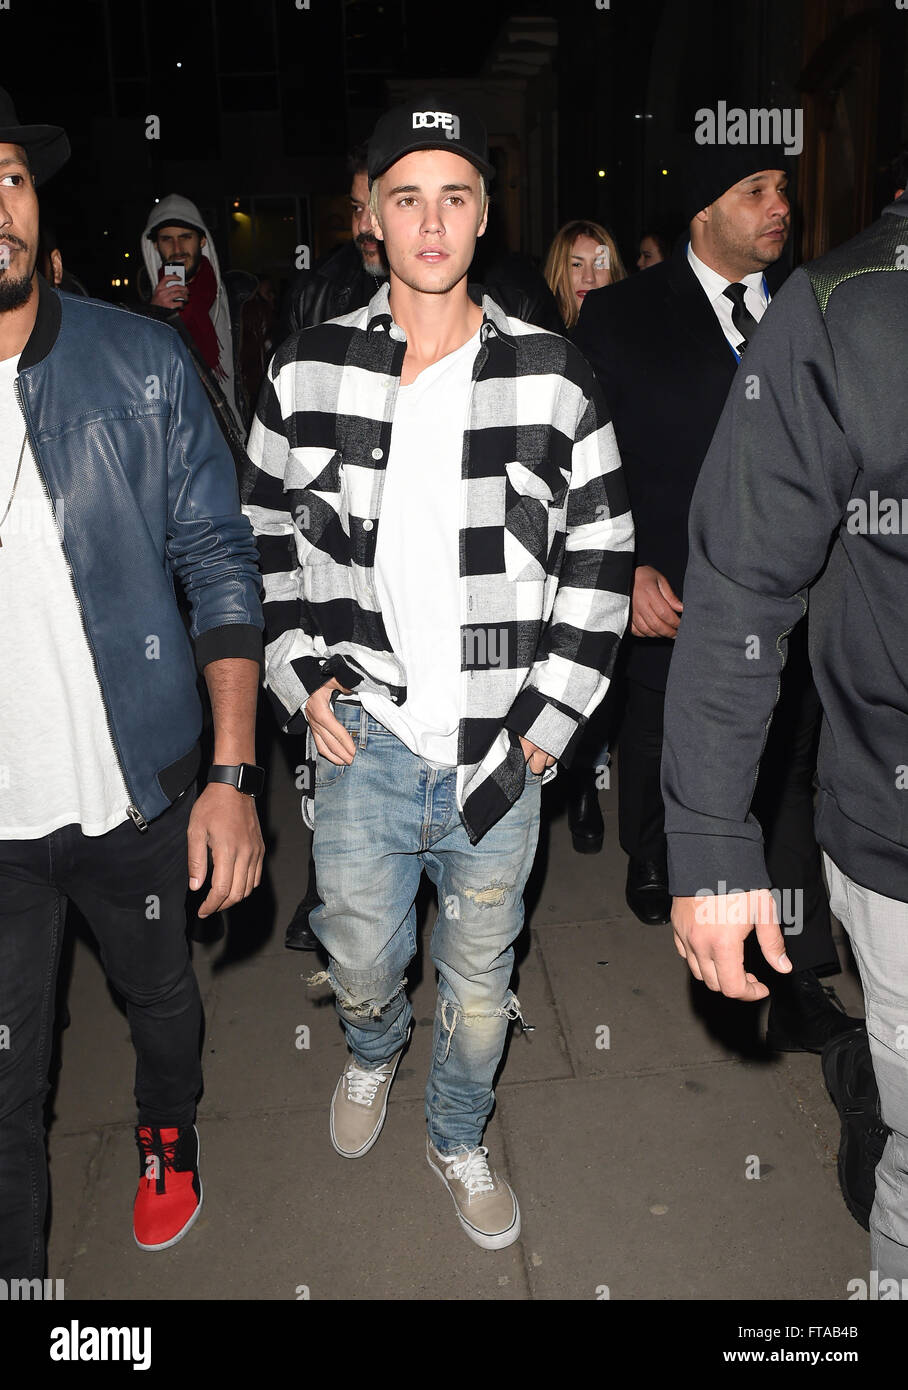 Justin Bieber Seen Arriving At Tape Nightclub In London Ahead Of His Performance At The 16 Brit Awards Justin Was Seen Wearing A Baseball Cape With The Slogan Dope On As He